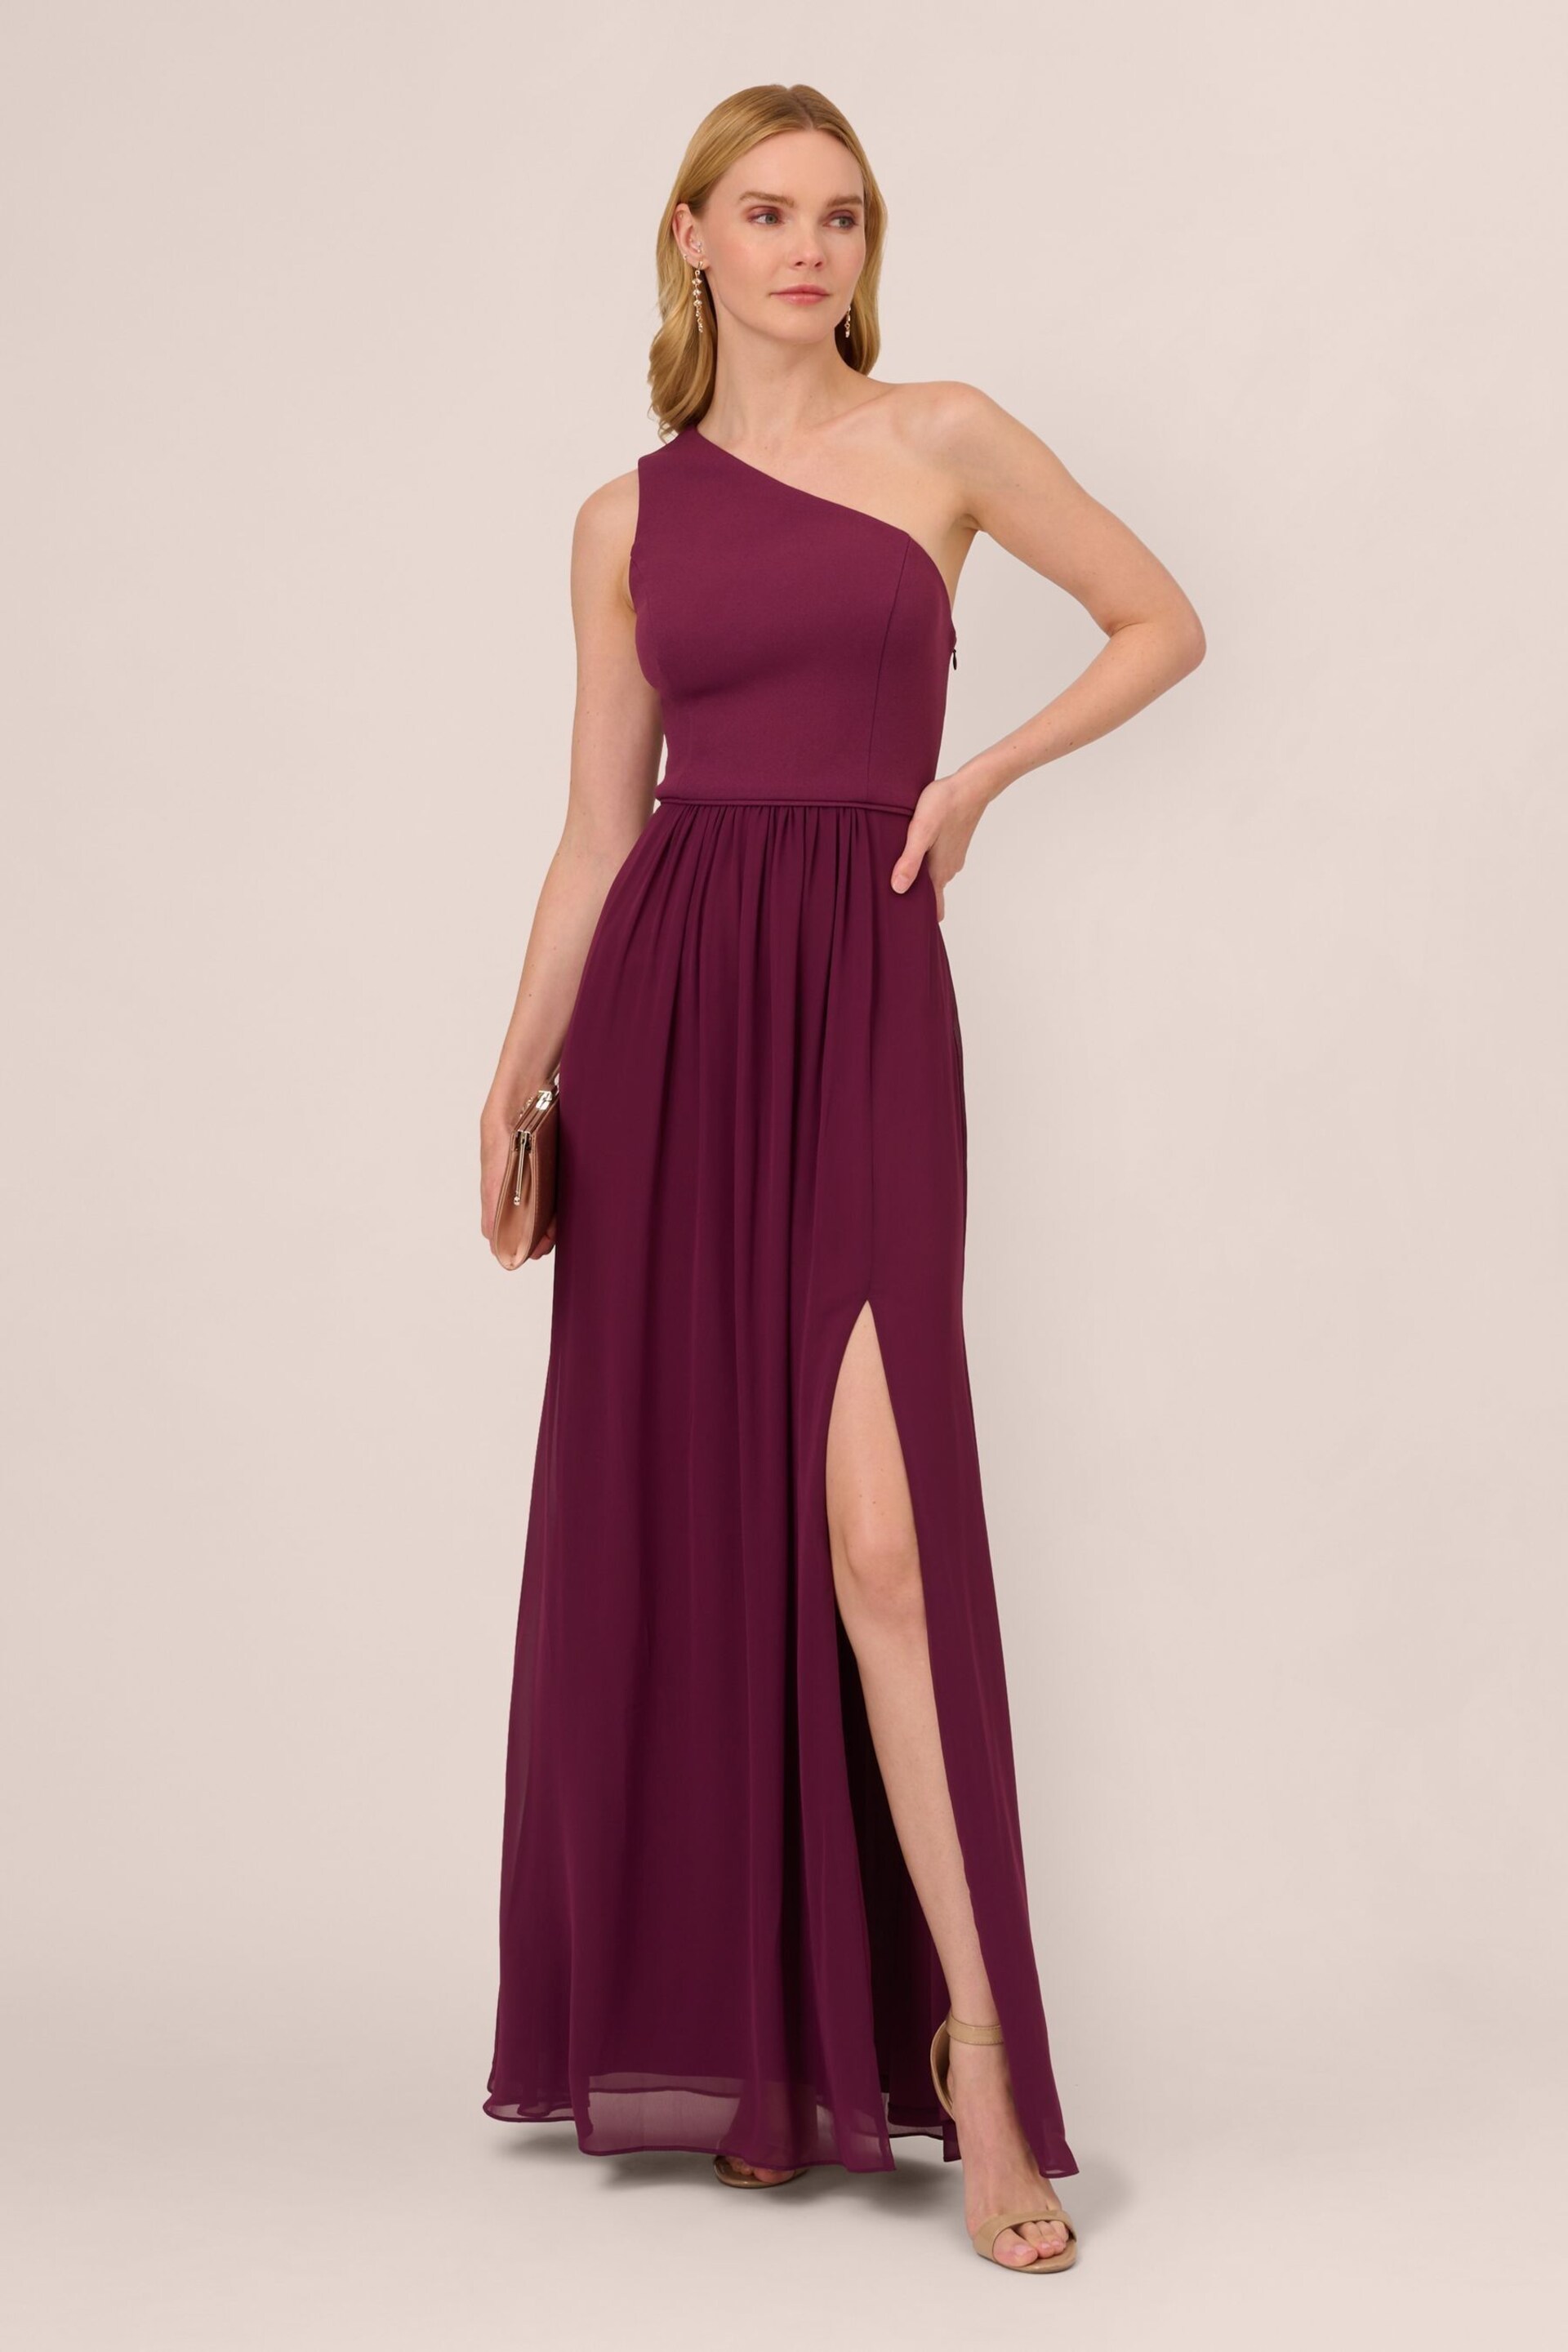 Adrianna Papell One Shoulder Chiffon Gown - Image 3 of 7